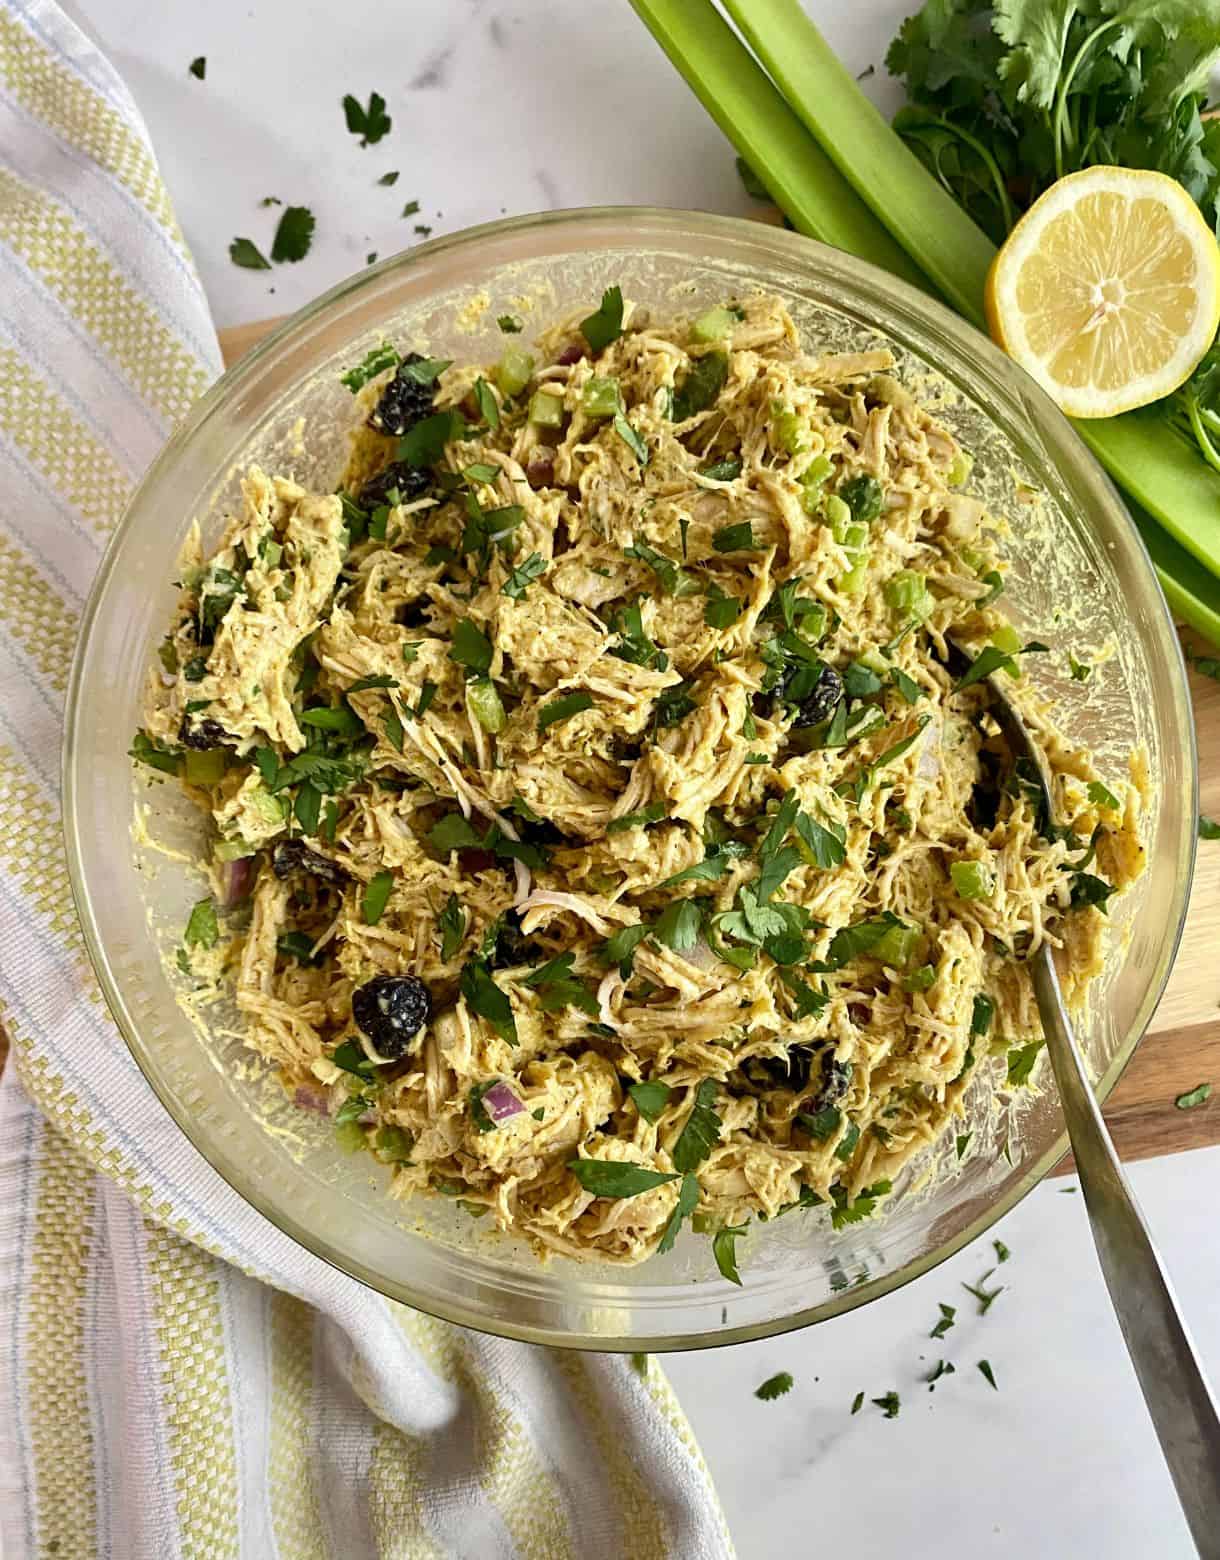 A bowl of Healthy Curried Chicken Salad all mixed together.